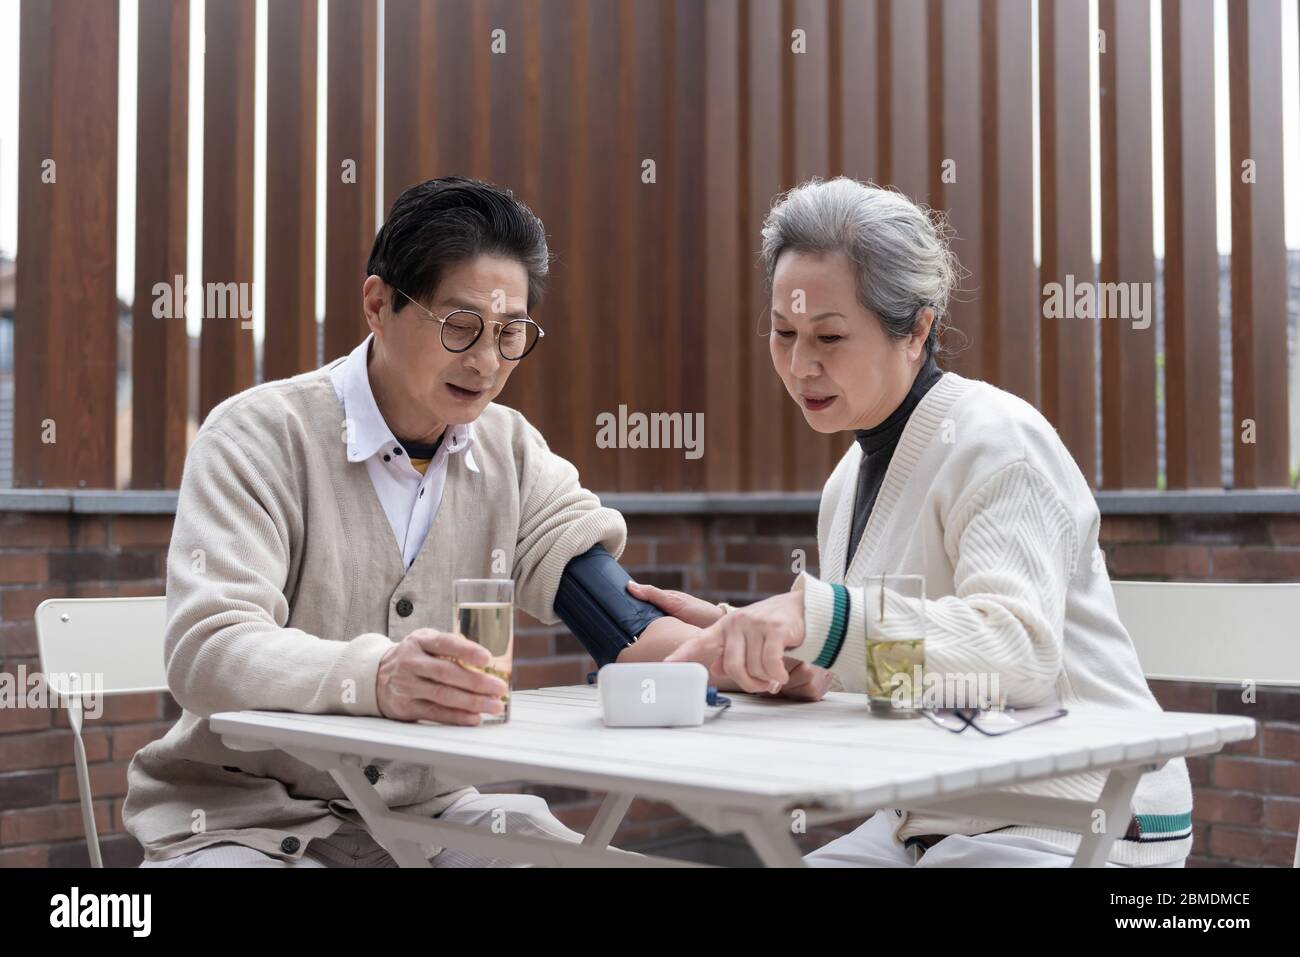 An Asian elderly couple is measuring blood pressure Stock Photo